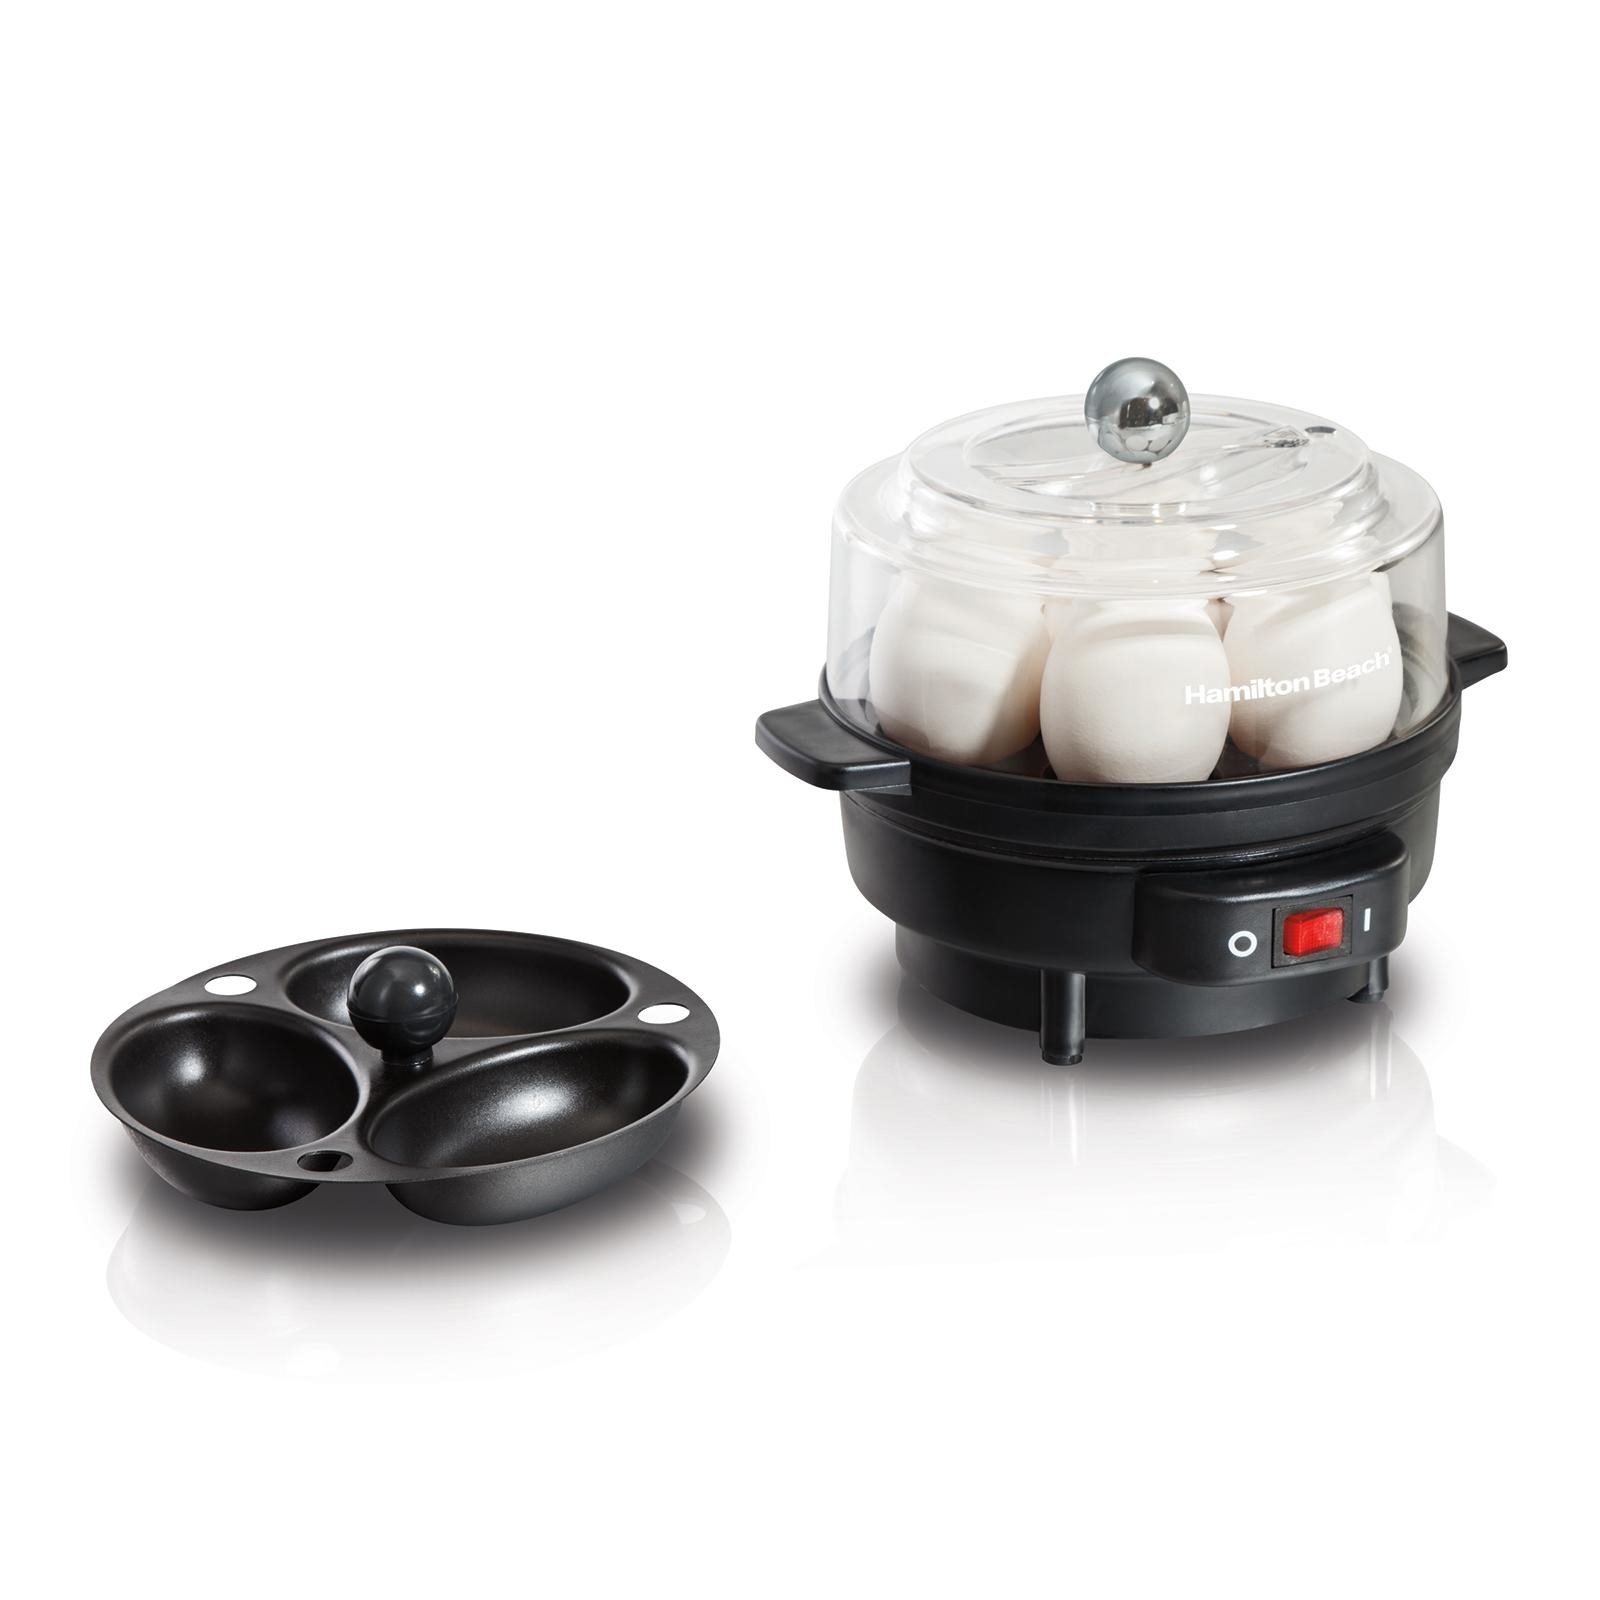 black egg cooker filled with eggs next to egg poacher dish